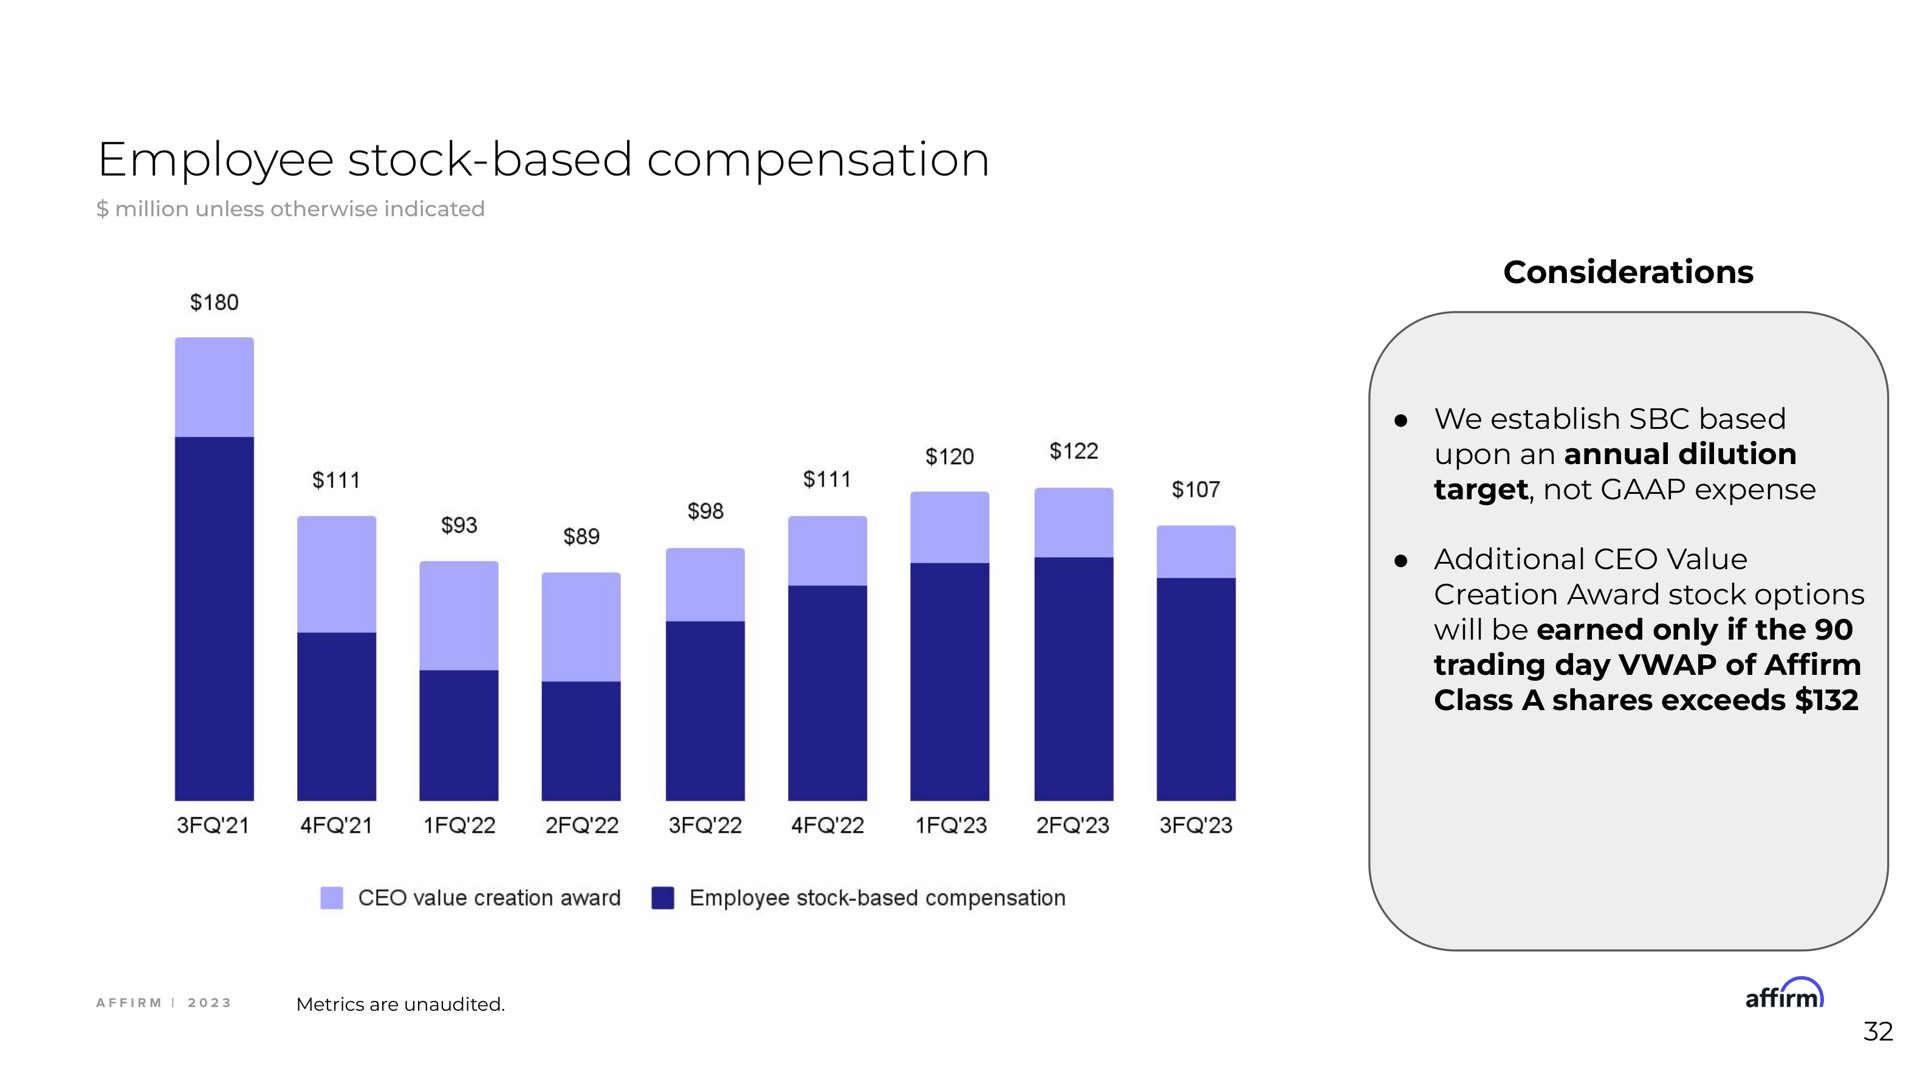 employee stock based compensation considerations class a shares exceeds | Affirm